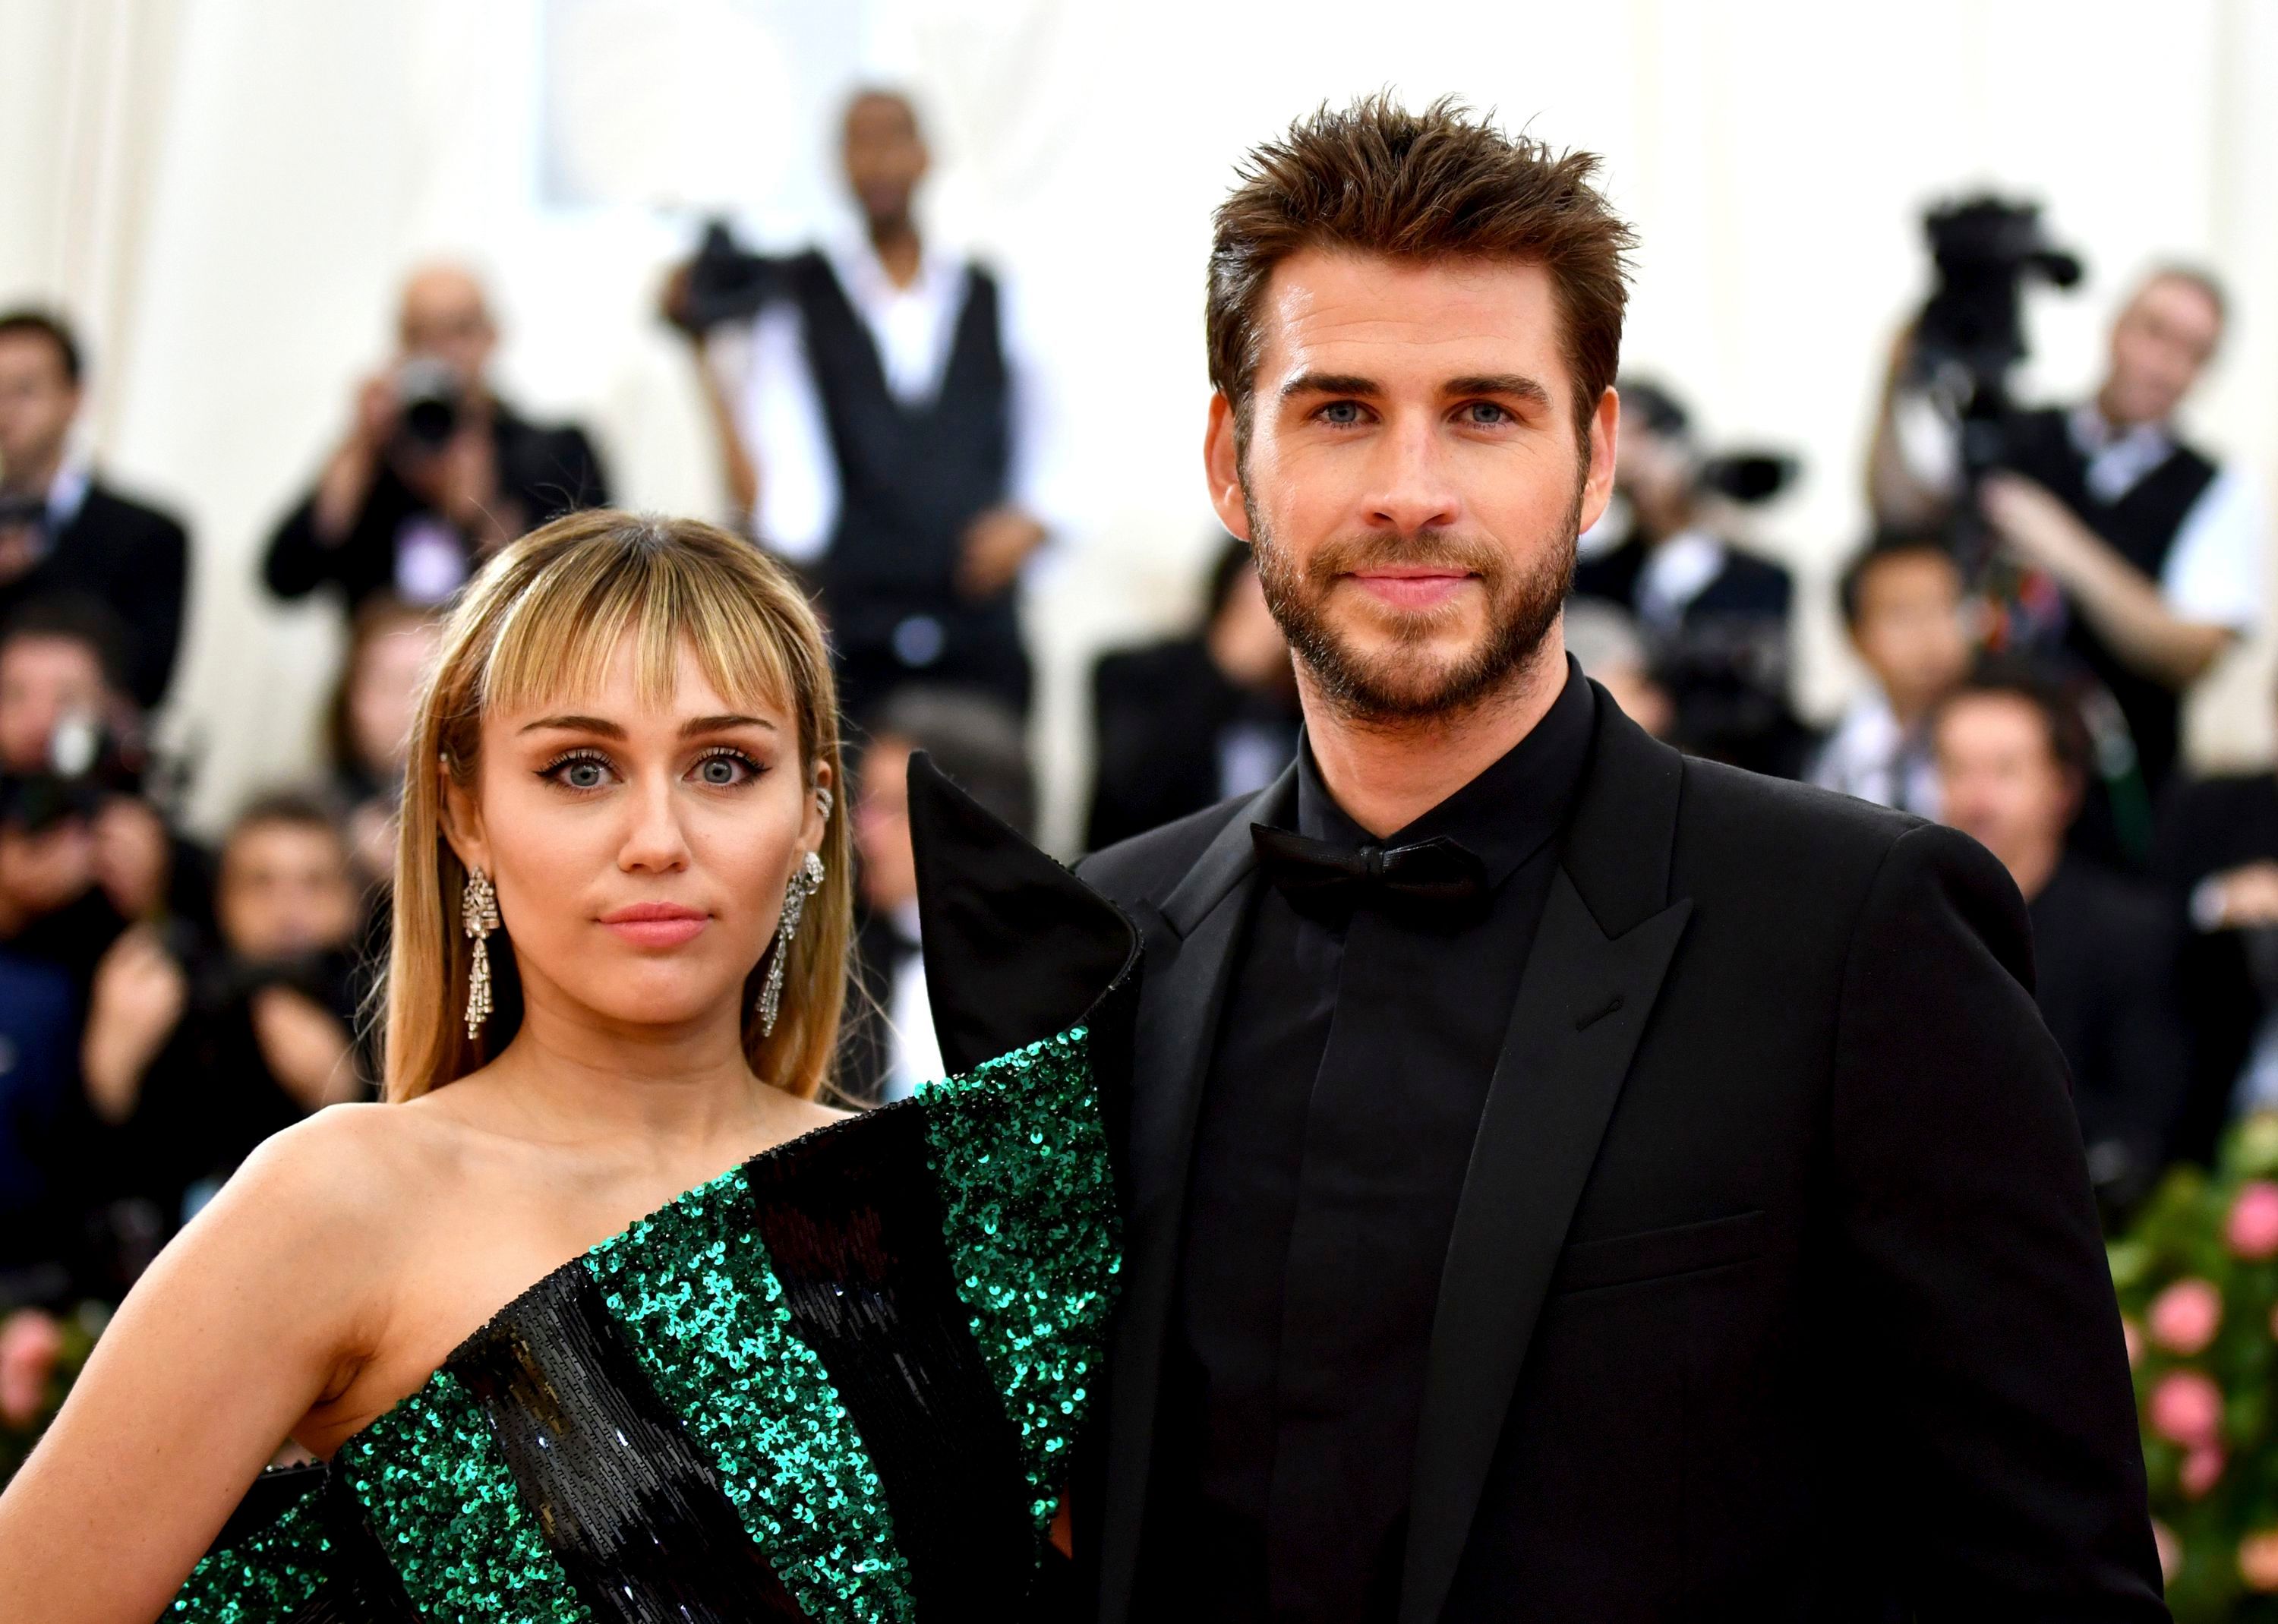 Miley Cyrus: There Was 'Too Much Conflict' With Liam Hemsworth